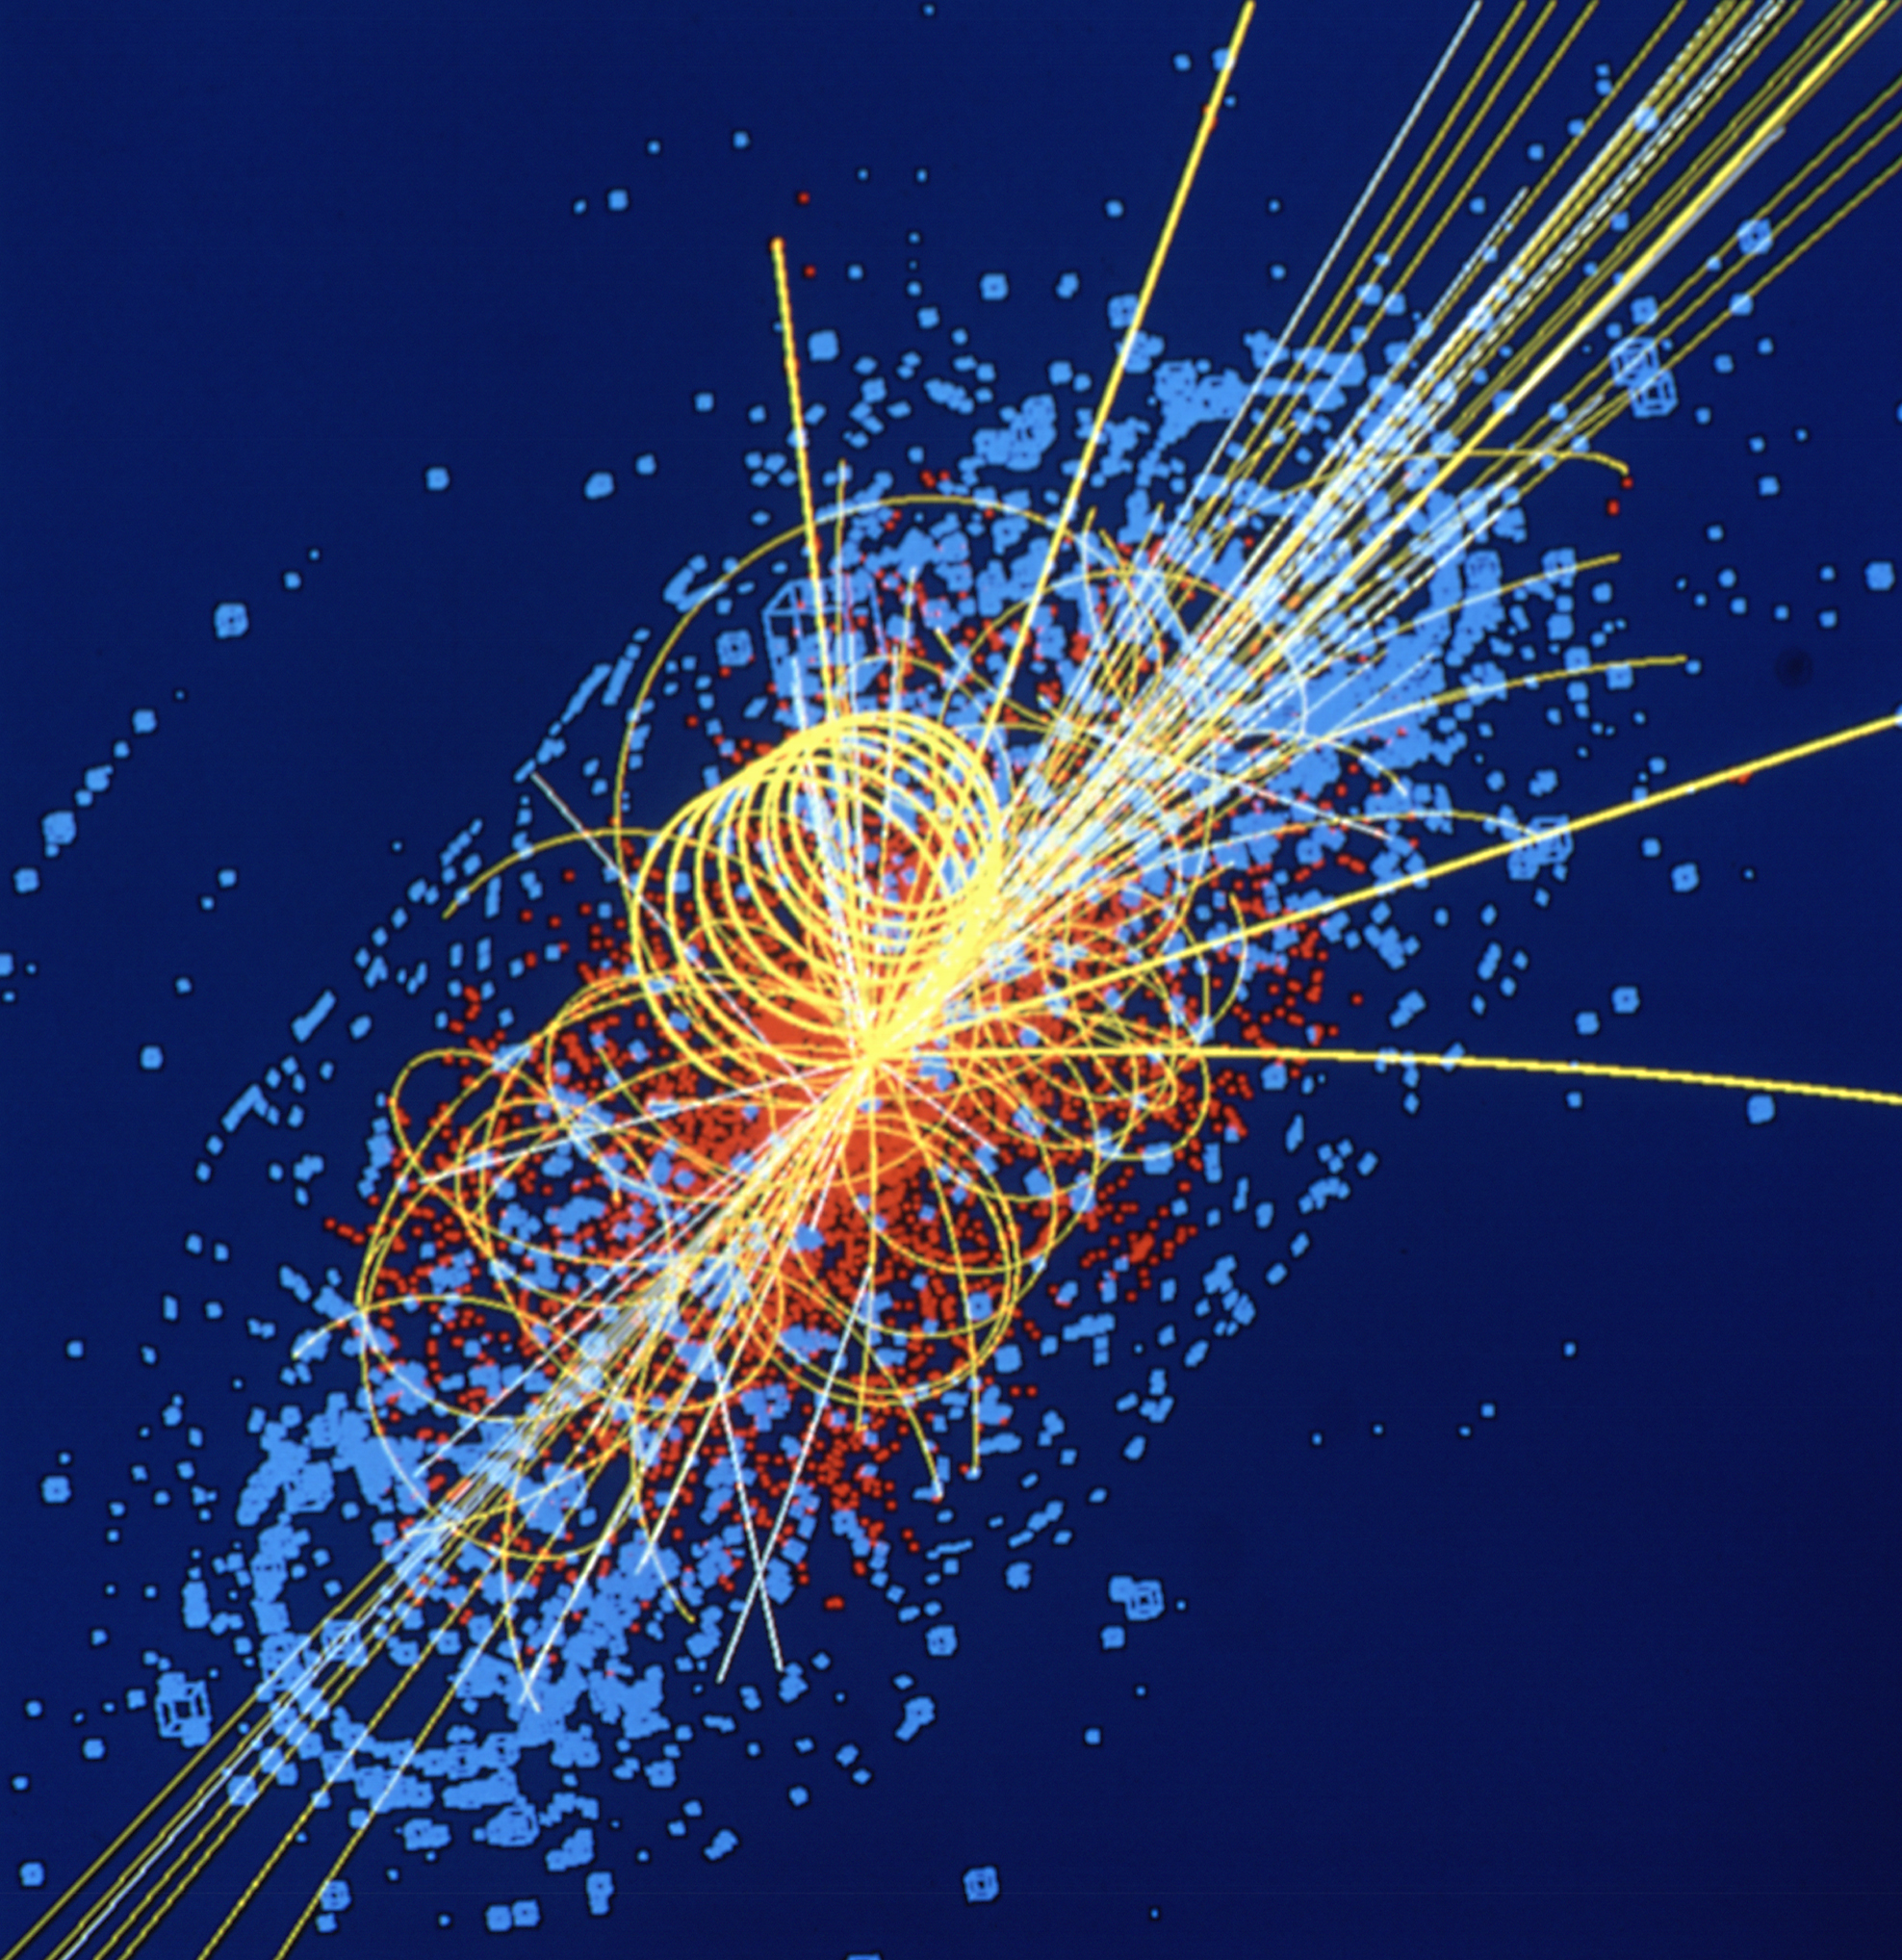 A CERN artist's impression of the decay of the Higgs boson.